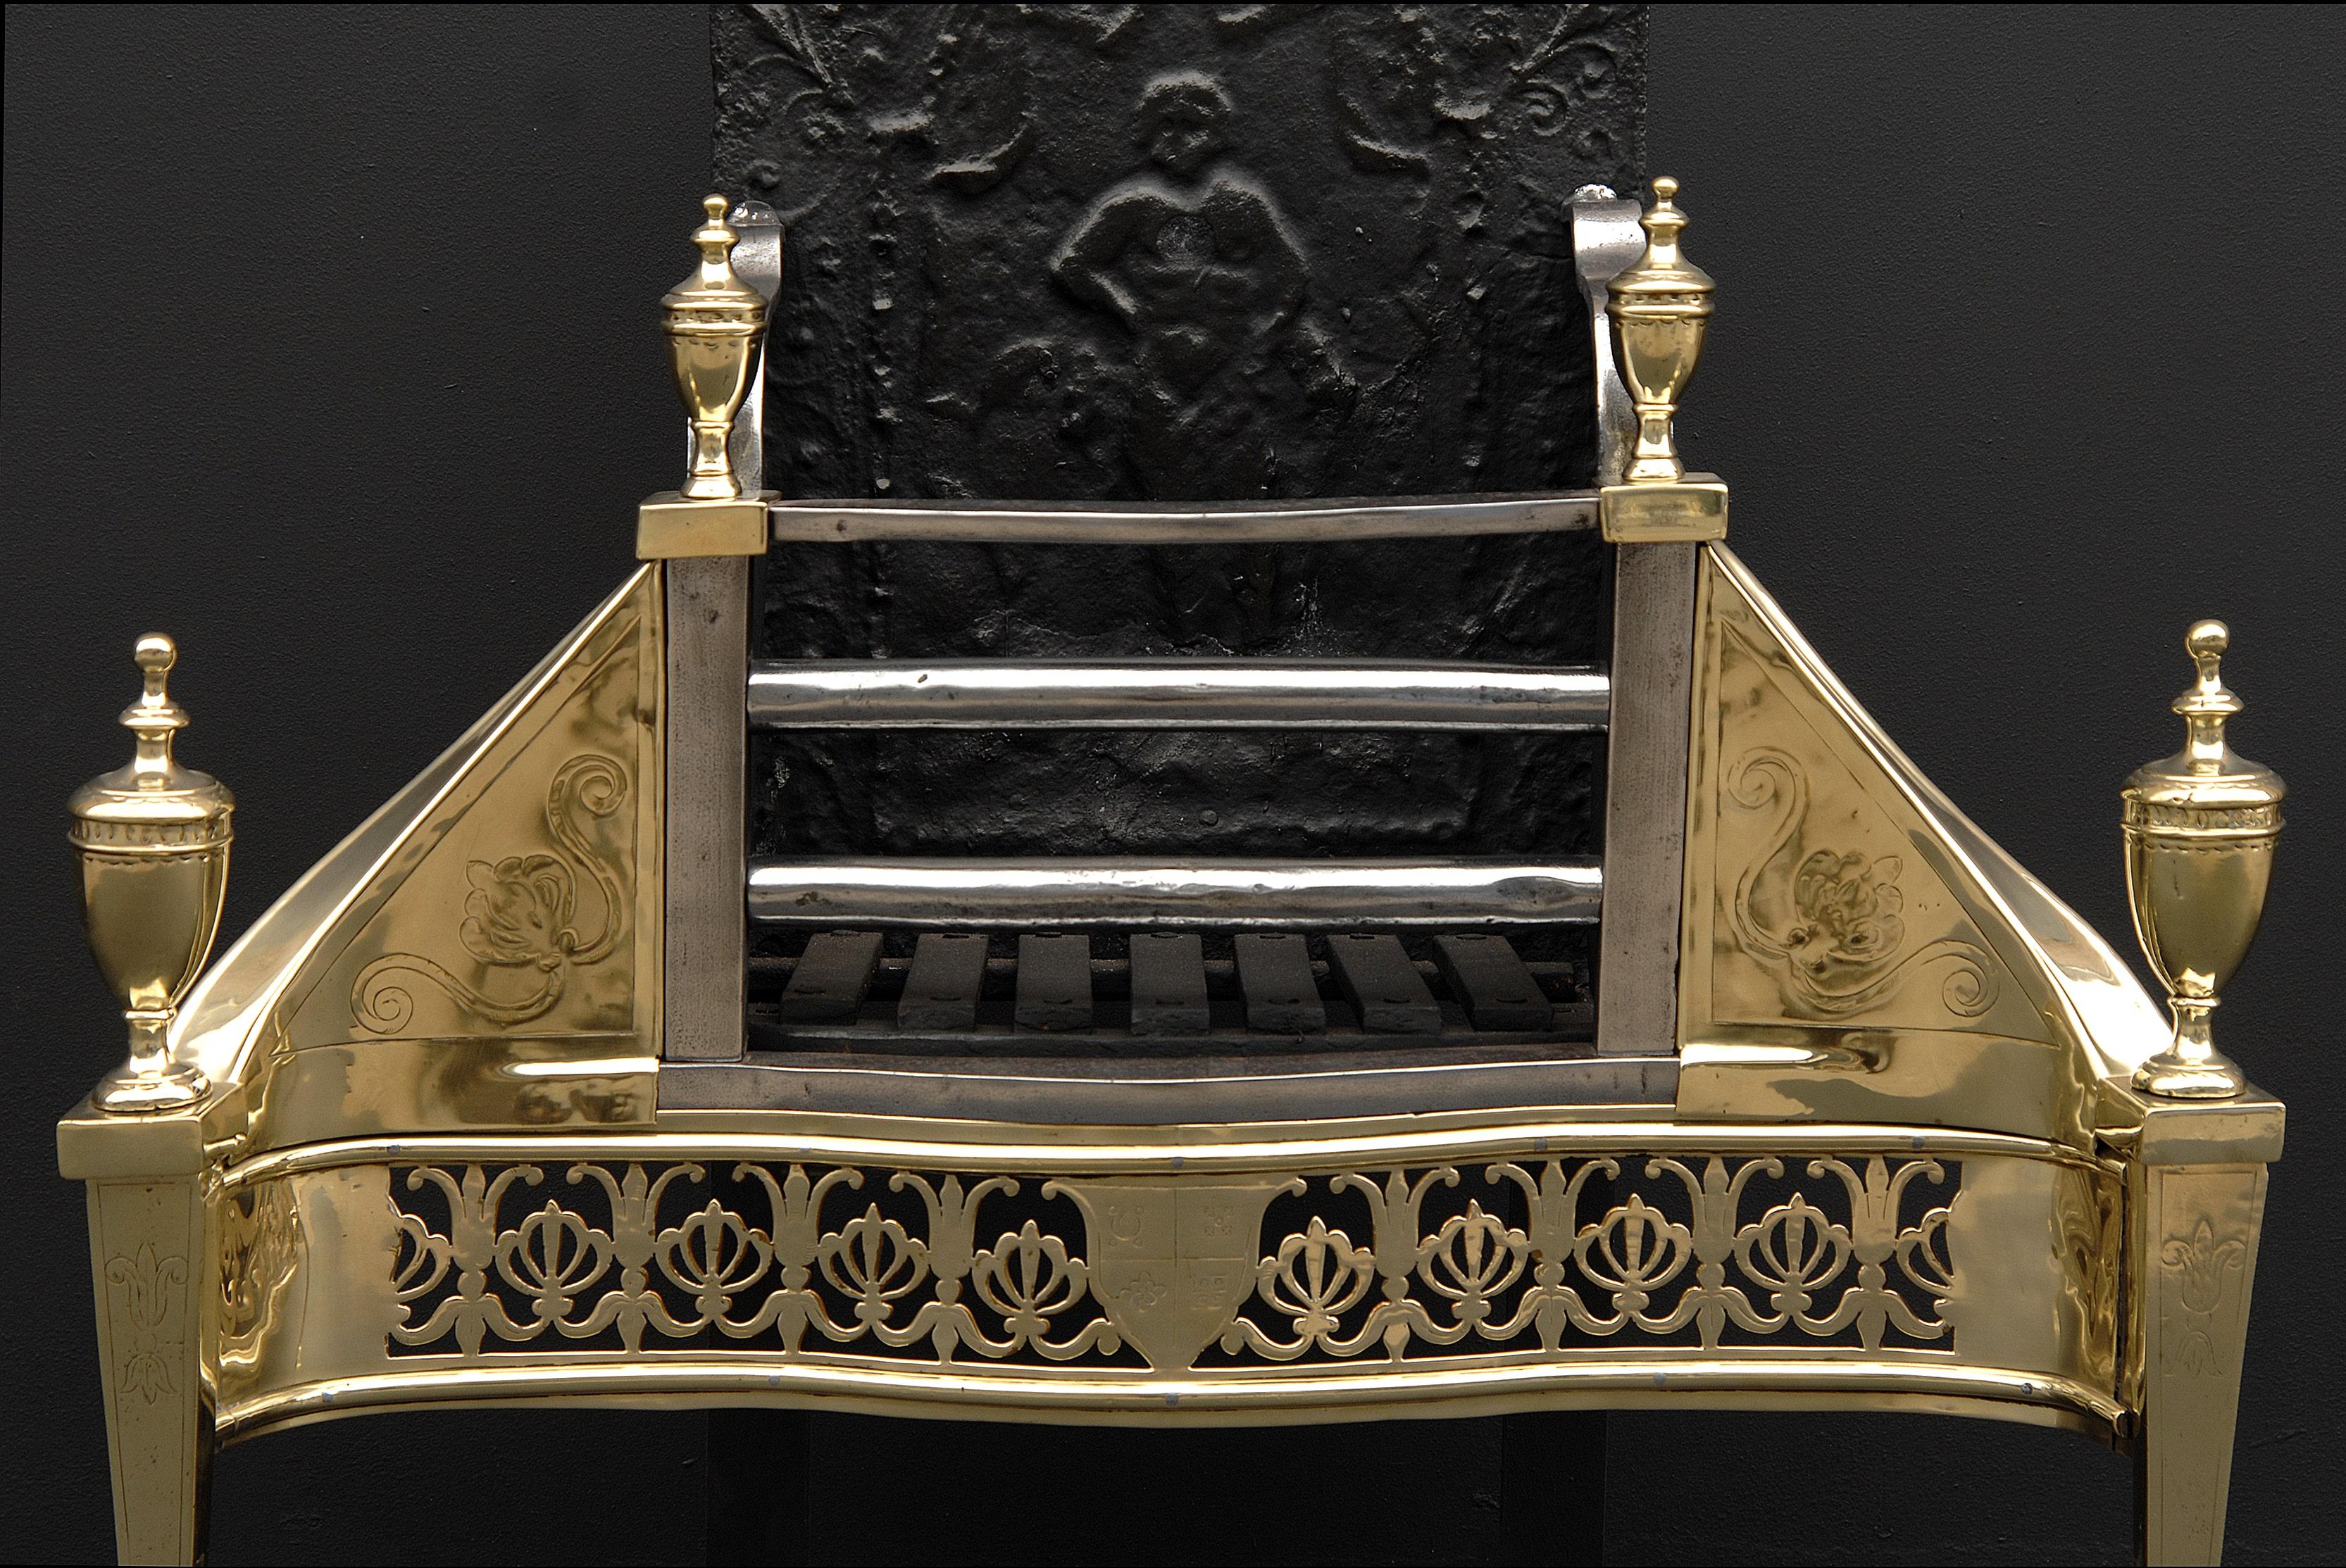 A good quality early 19th century Georgian brass and steel engraved firegrate, with serpentine shaped Athenian fret and shield to centre, square tapered legs surmounted by urn finials, engraved side wings, and ornamental cast iron shaped